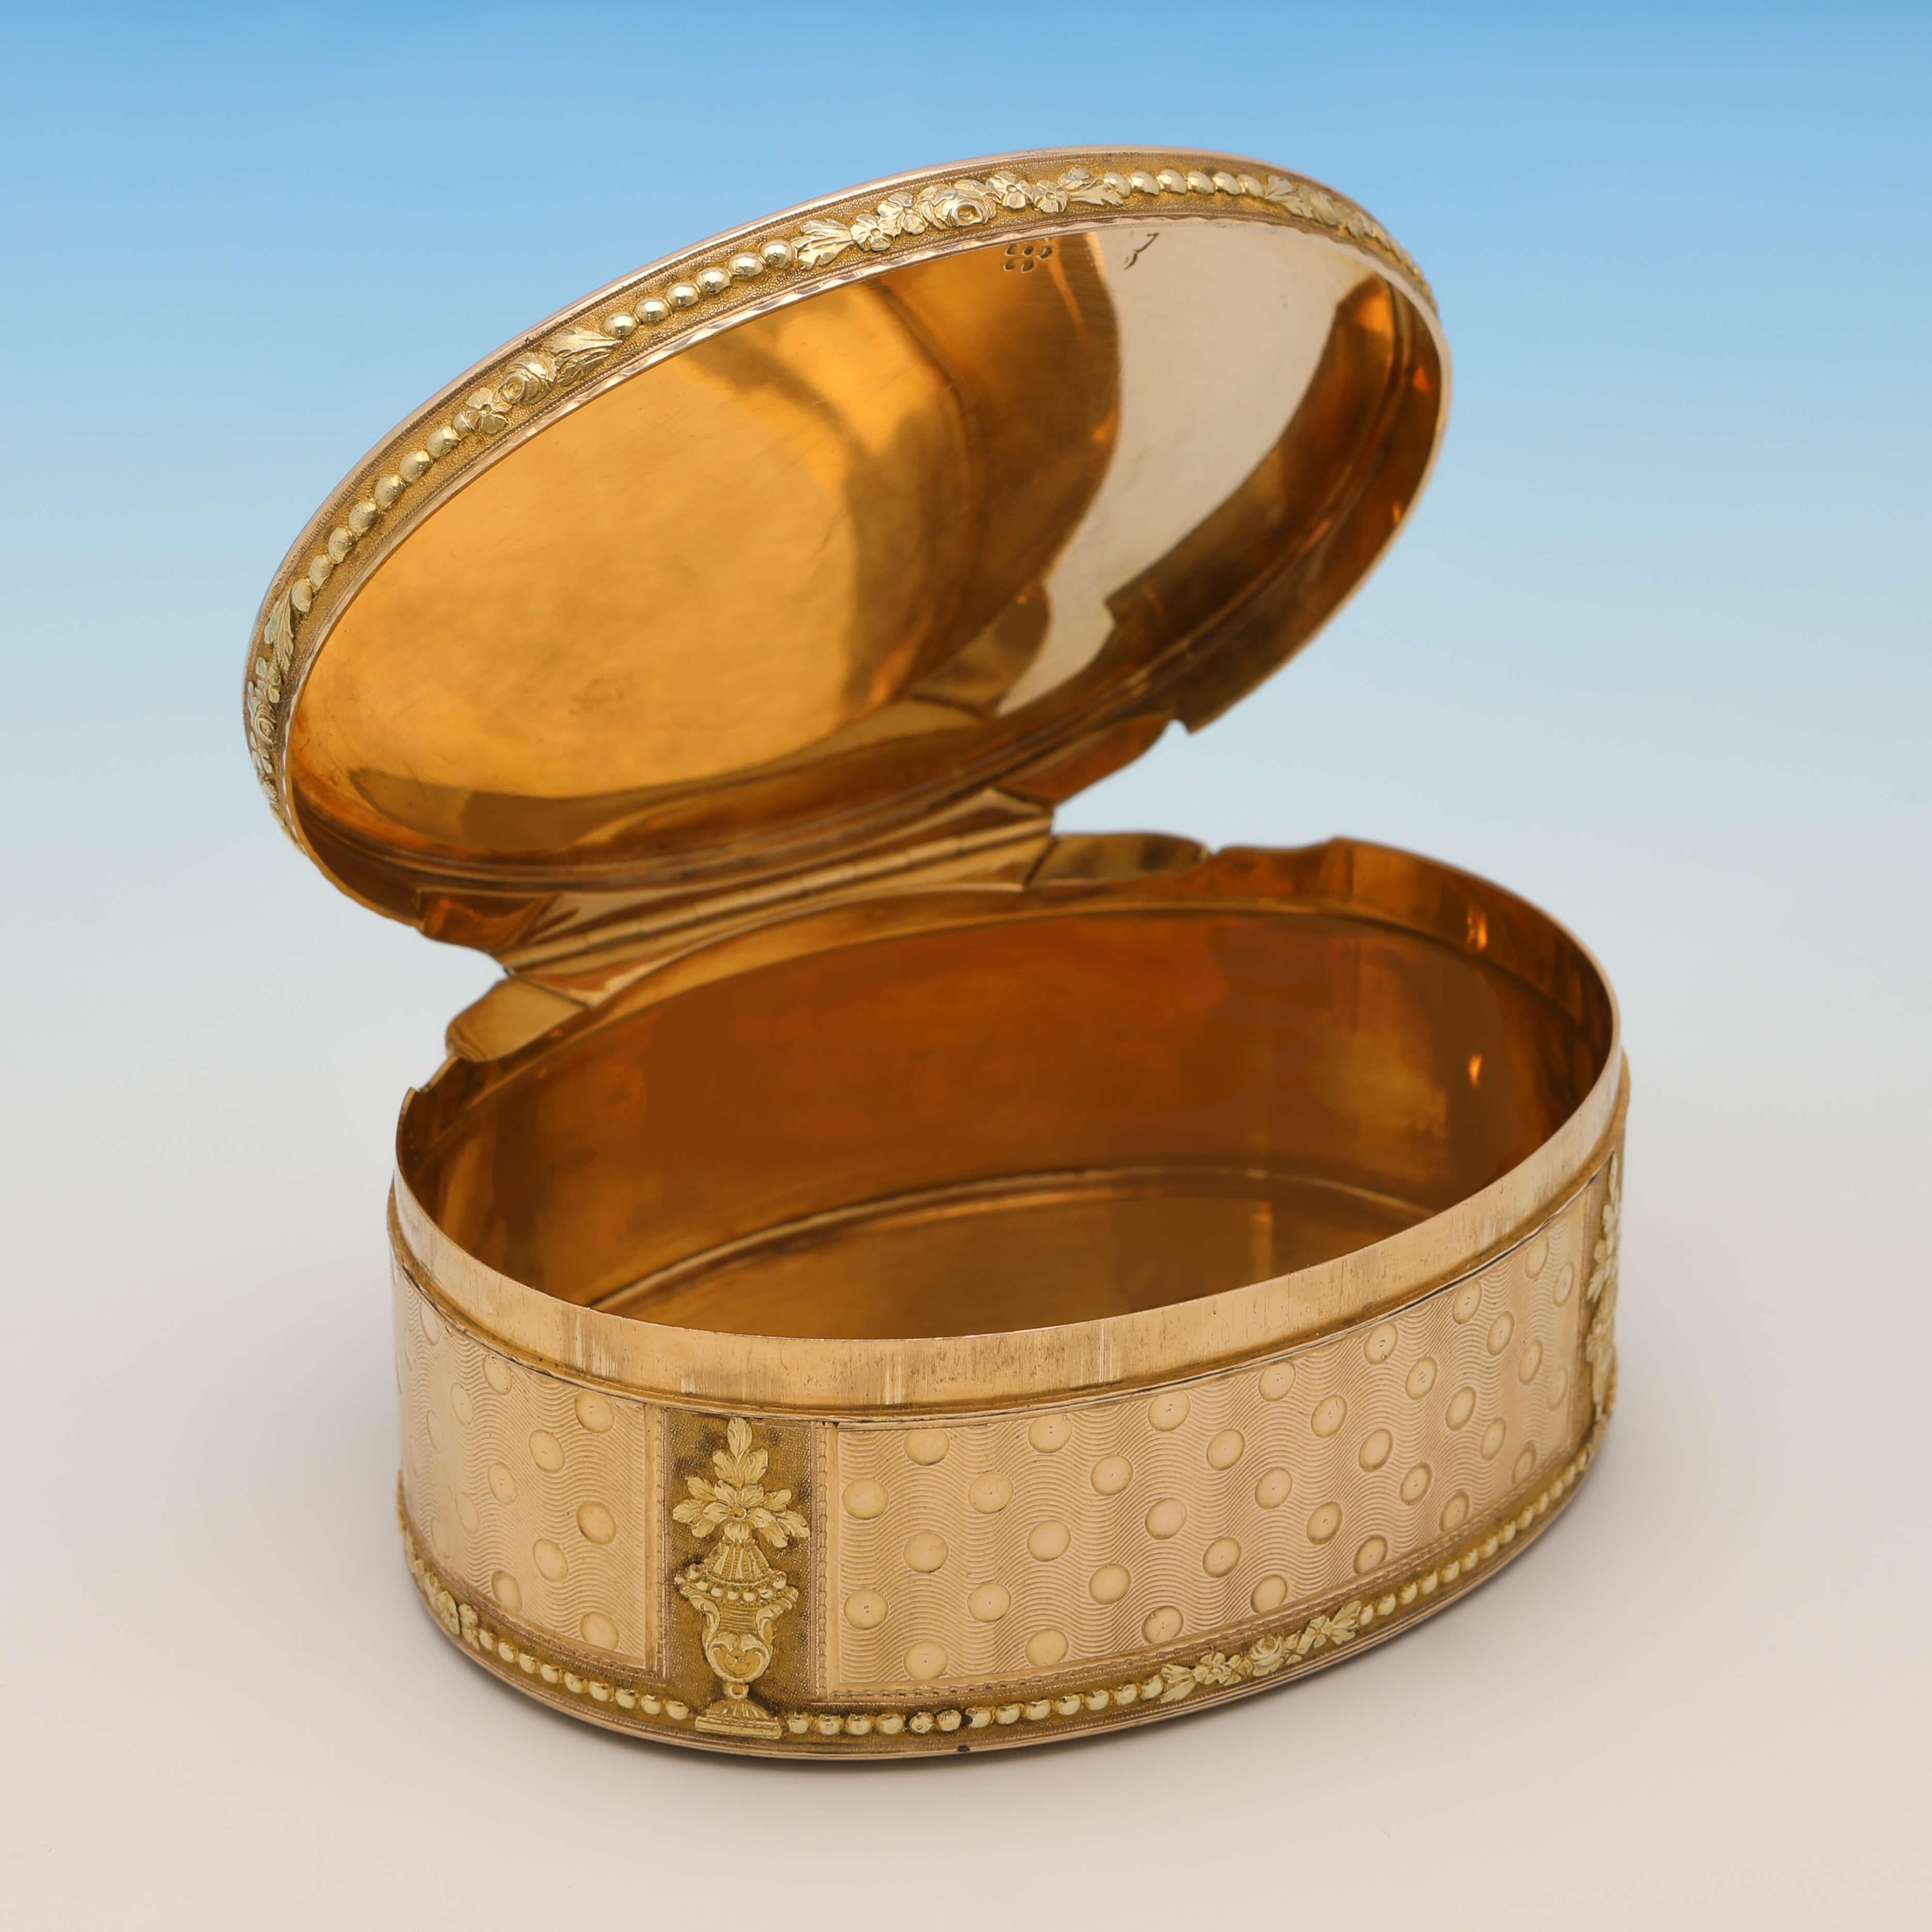 Made circa 1790 by Les Fréres Souchay, in Hanau, Germany, this stunning, George III, Antique 18ct. Gold Snuff Box, is in wonderful condition, featuring engine turned decoration to the rose coloured lid and body, and an applied contrasting yellow